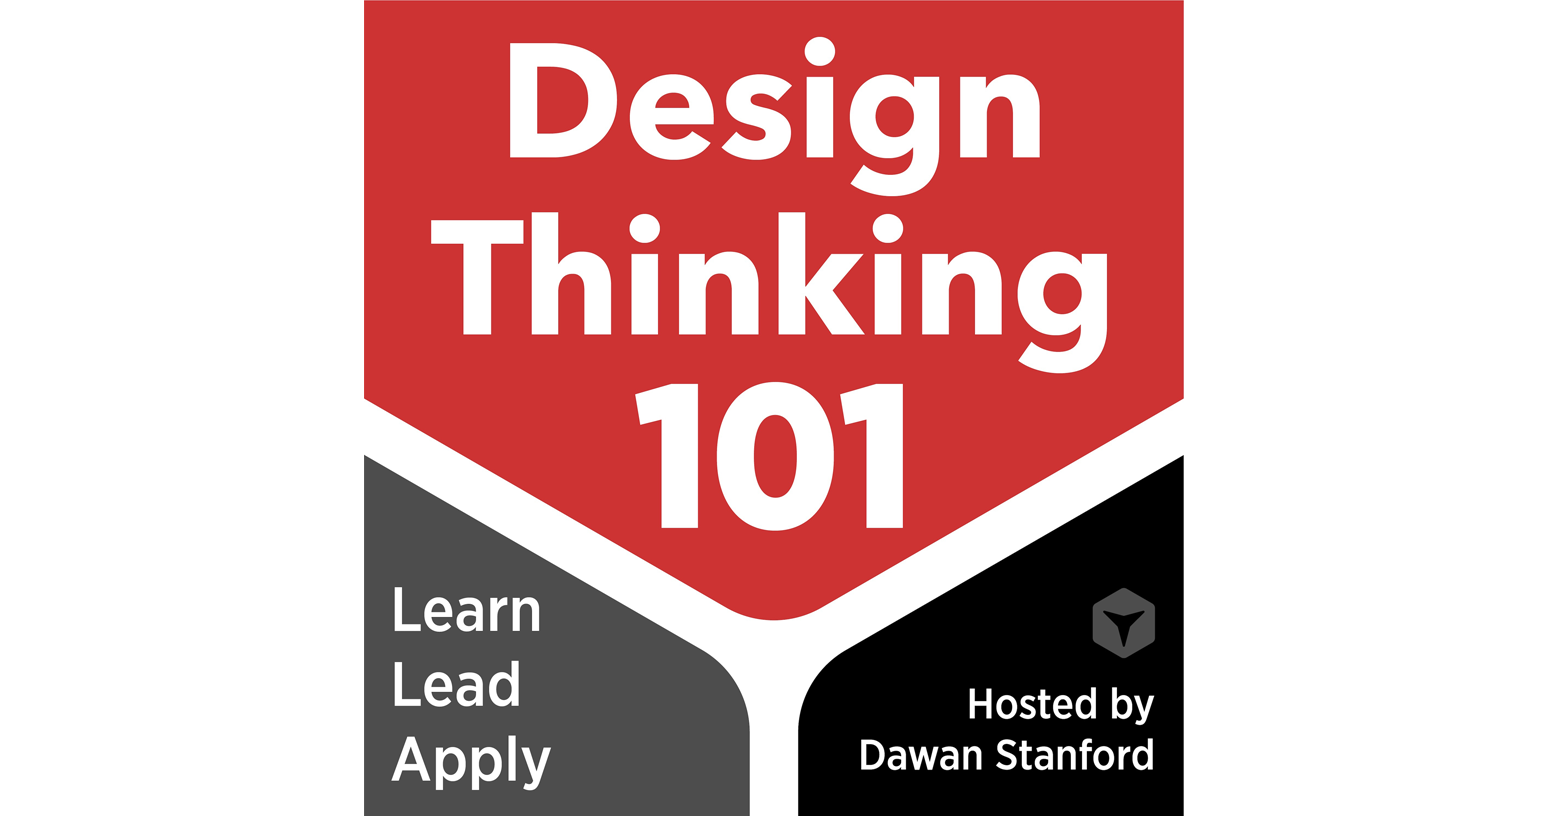 red trapezoid with the words "Design Thinking 101"